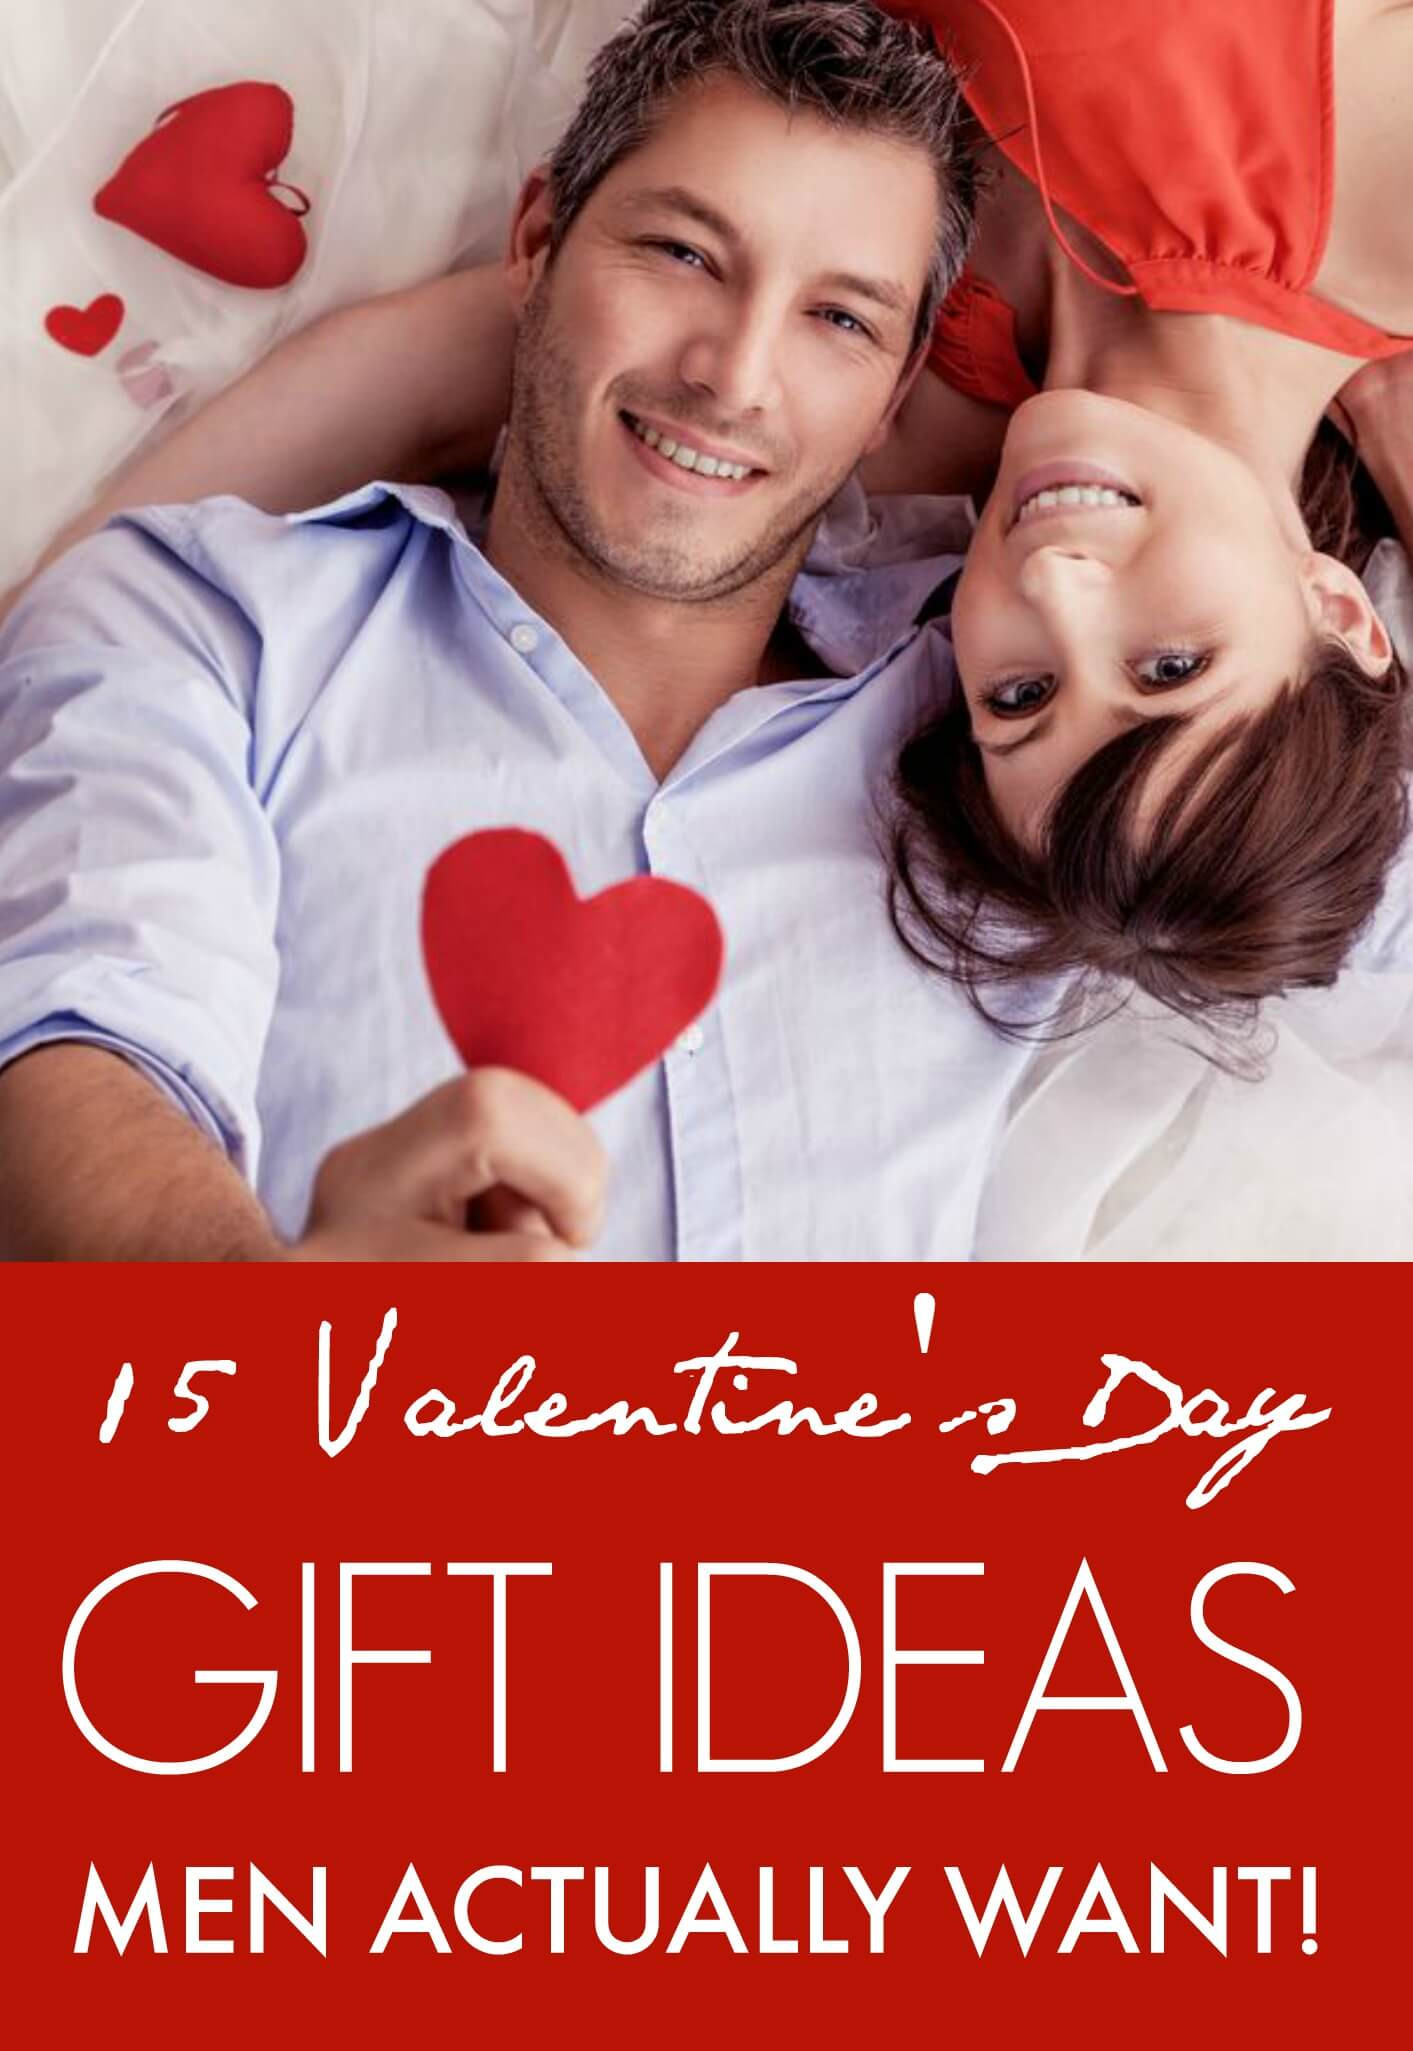 Guy Valentines Day Gift Ideas
 15 Valentine’s Day Gift ideas Men Actually Want